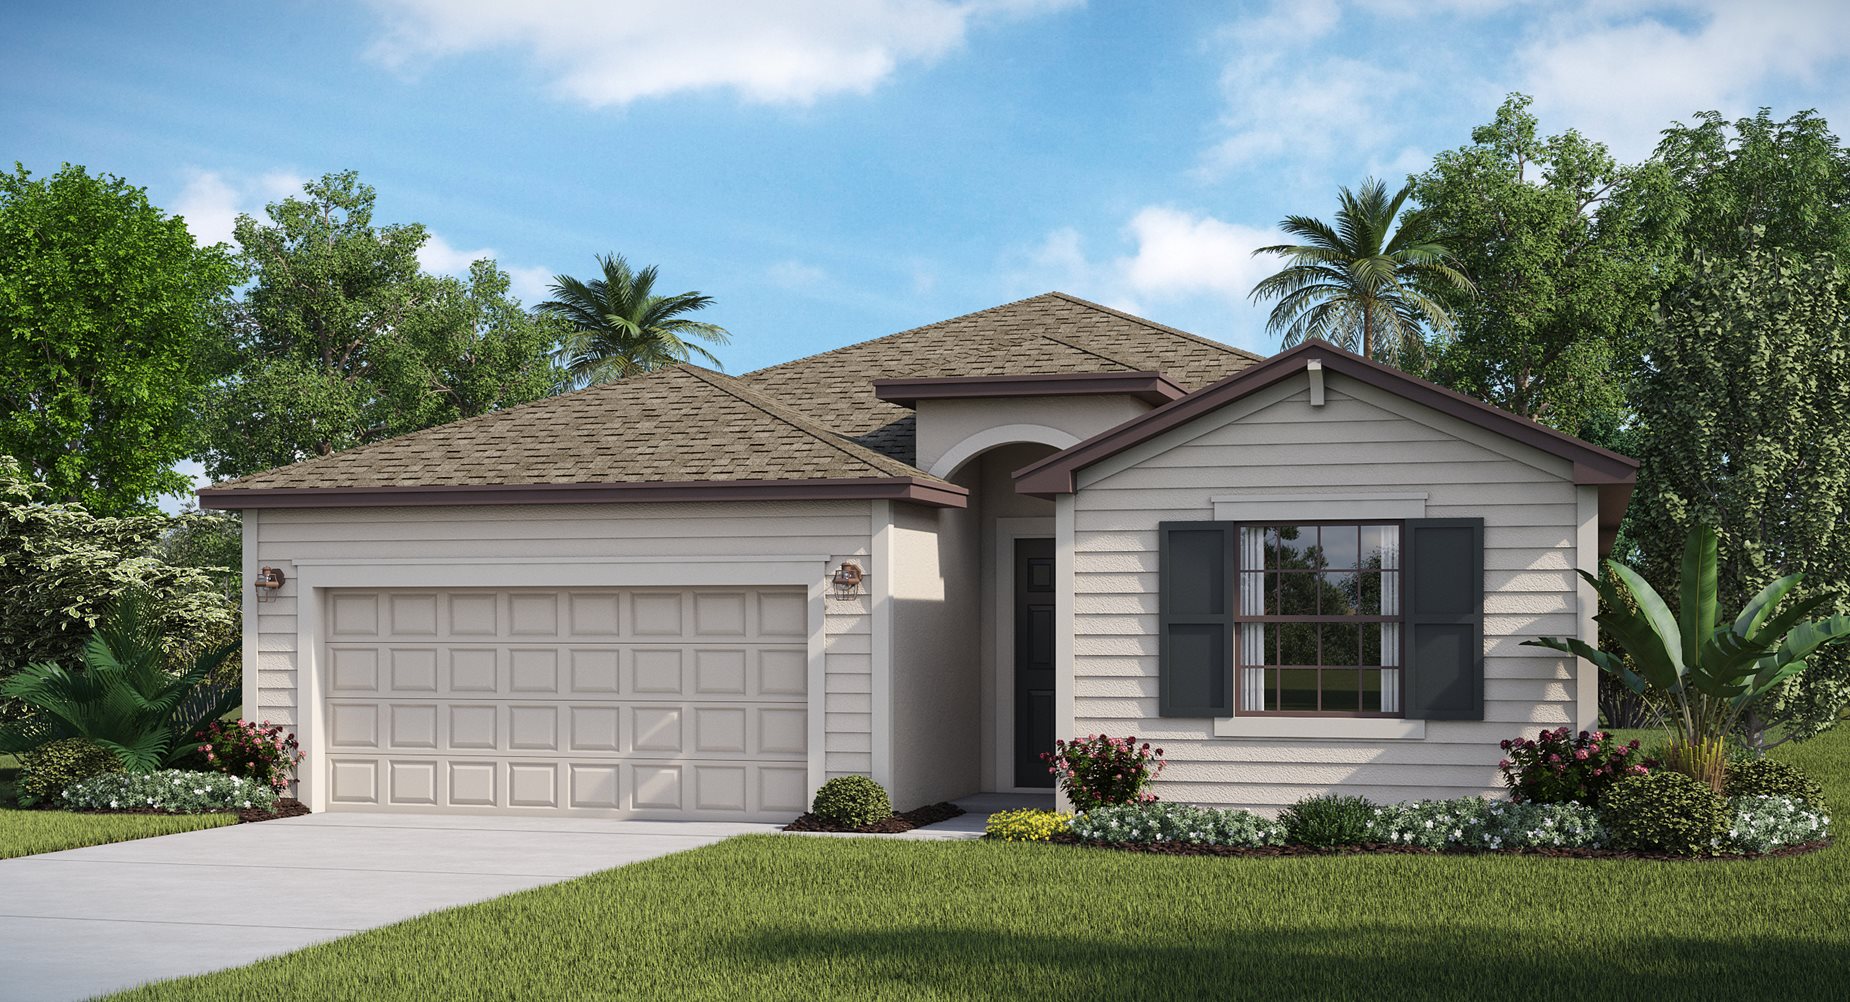 Trevi New Home Plan in Executive homes at Portico | Lennar